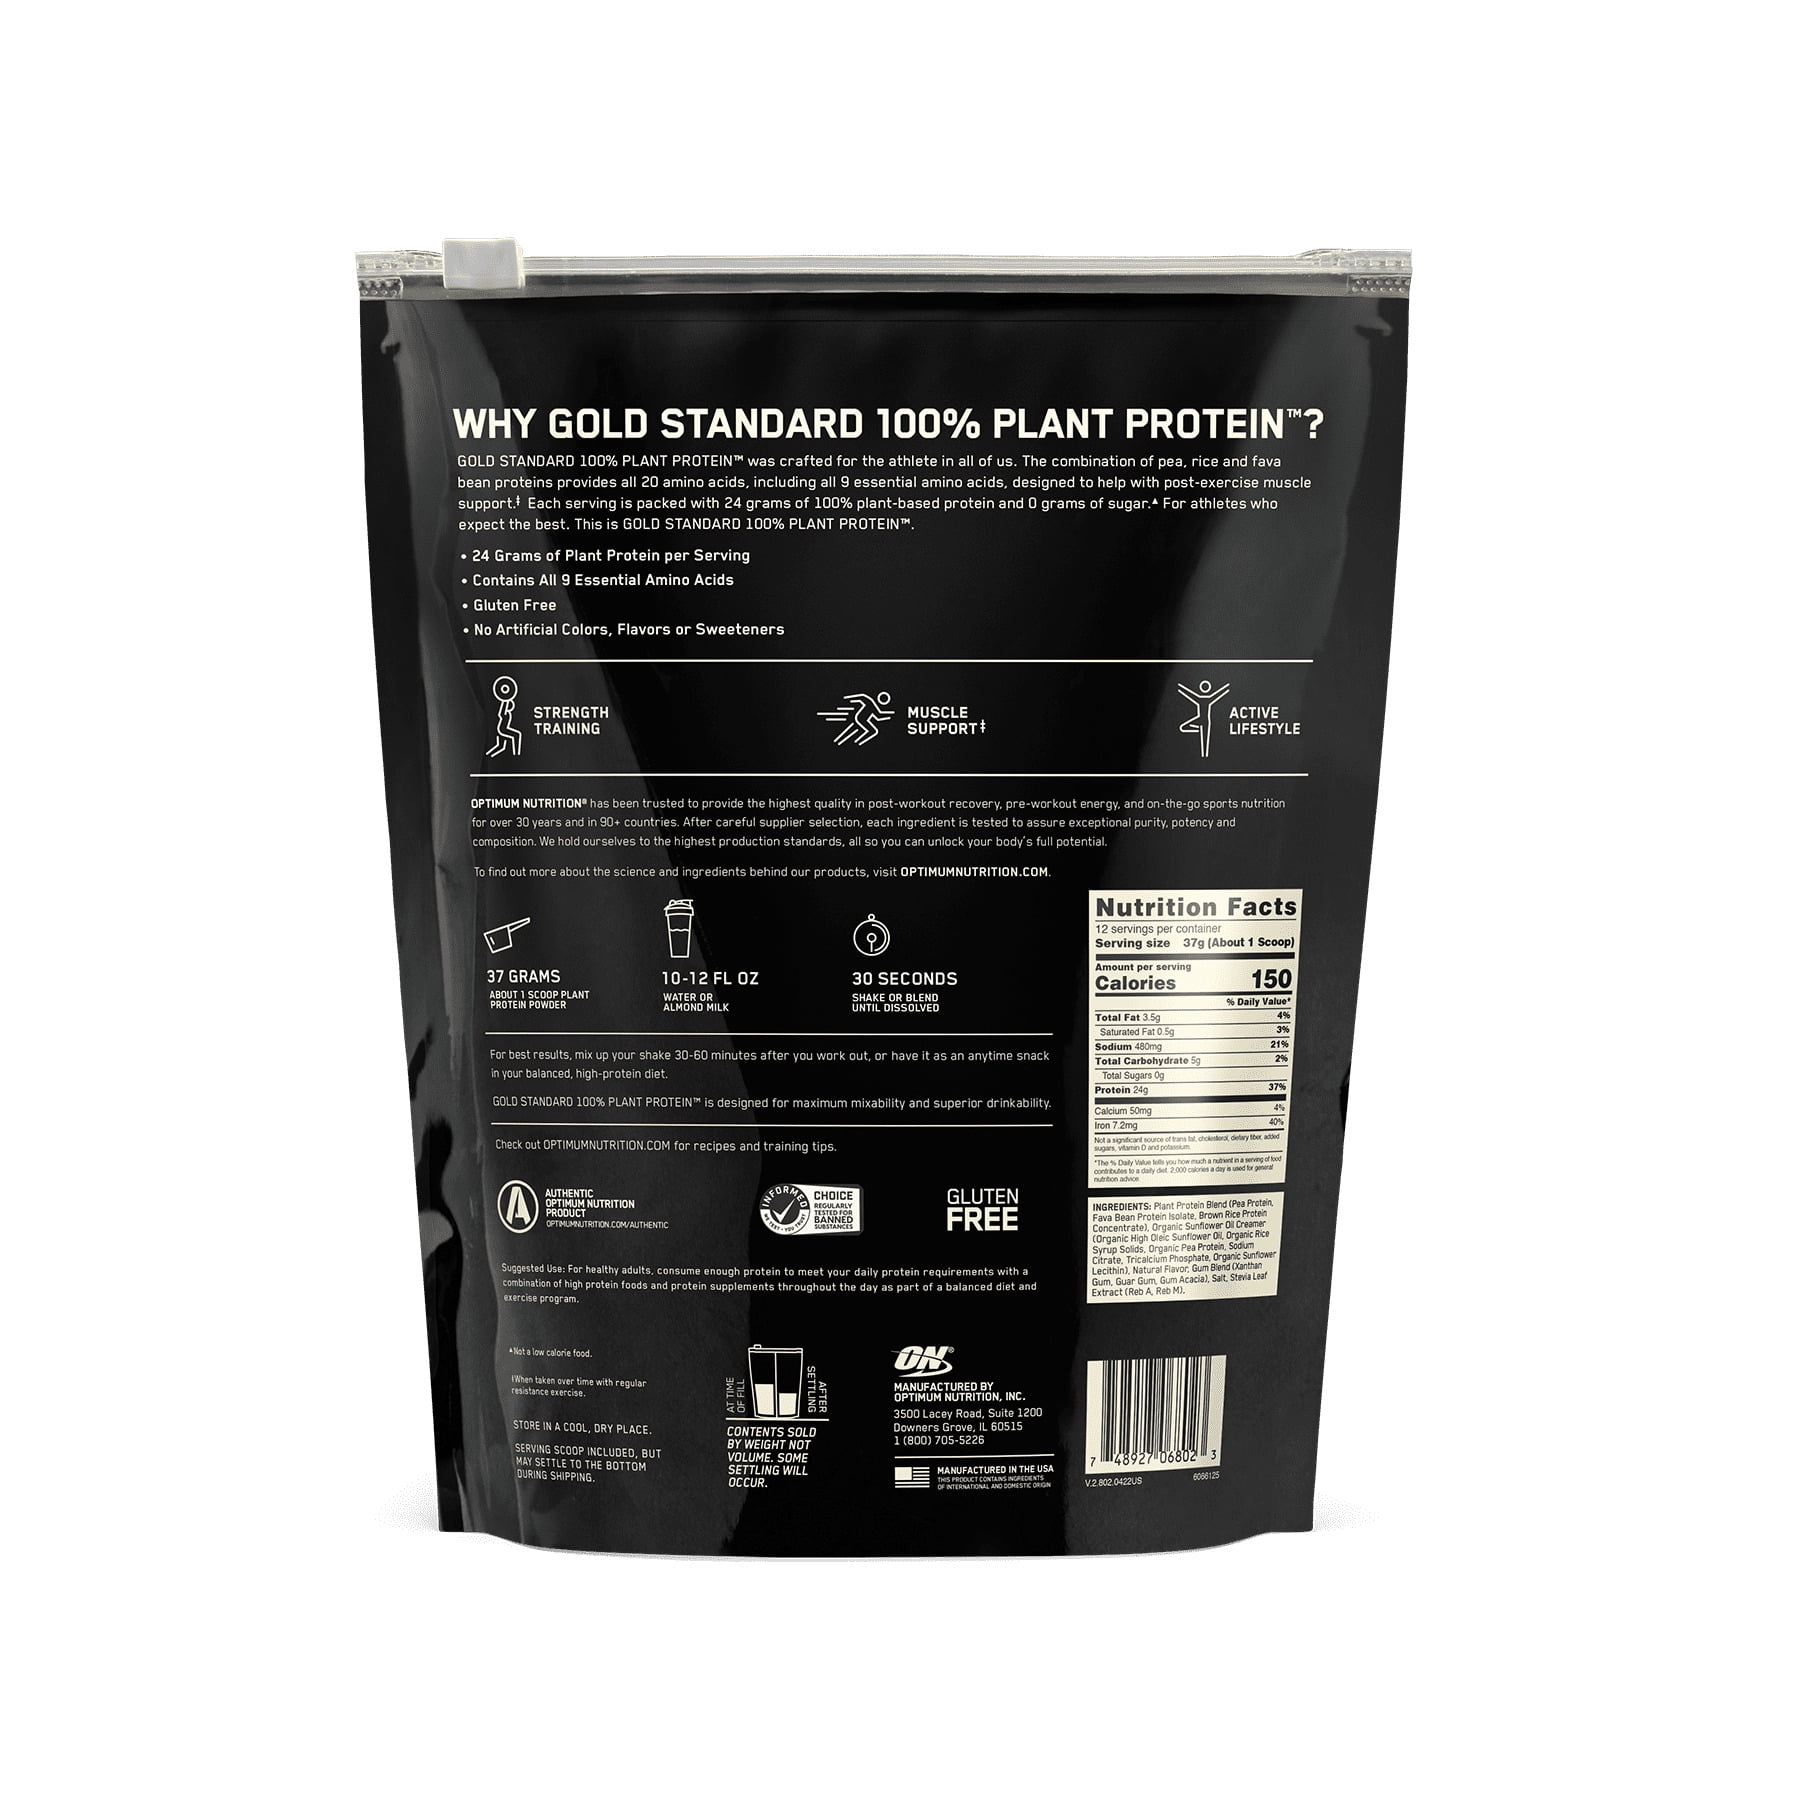 Collagen Protein Powder by ProT Gold - Vanilla by ProT Gold - Exclusive  Offer at $48.00 on Netrition